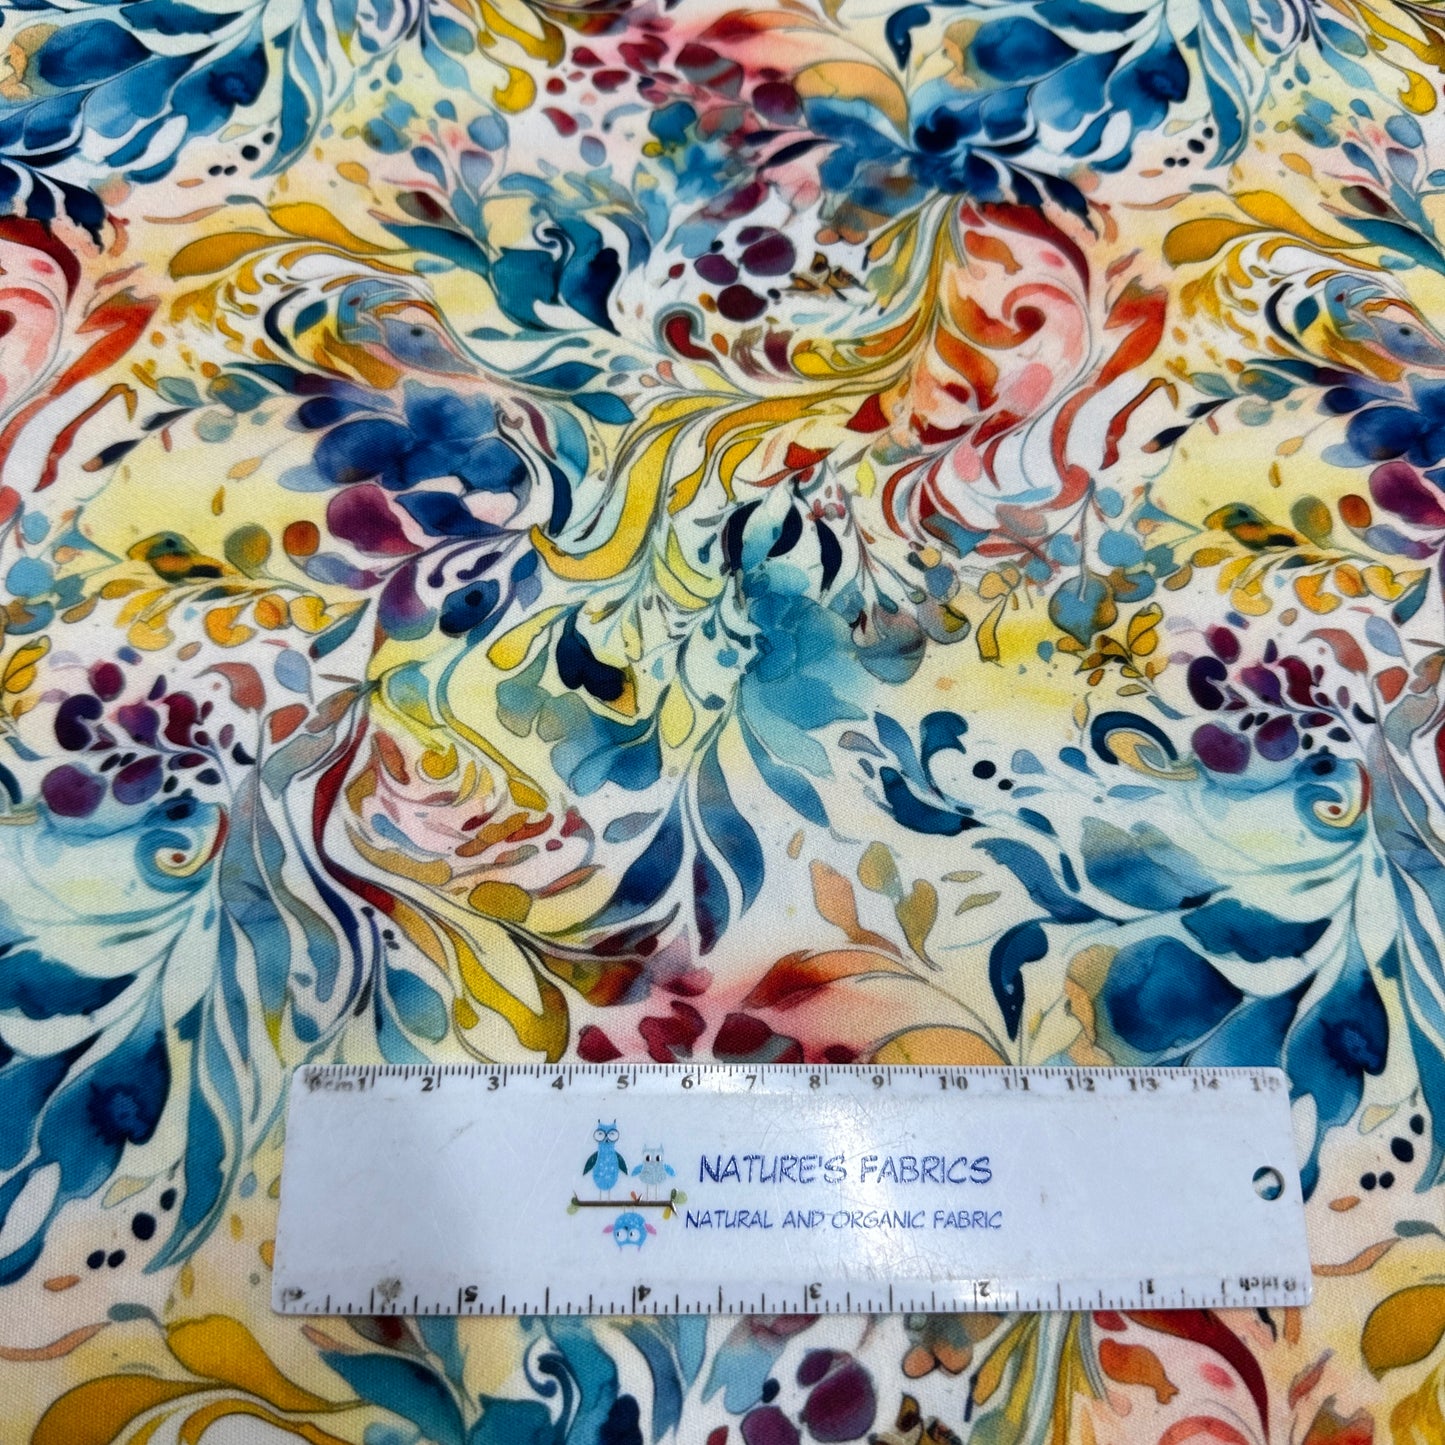 Floral Swirl Art 1 mil PUL Fabric - Made in the USA